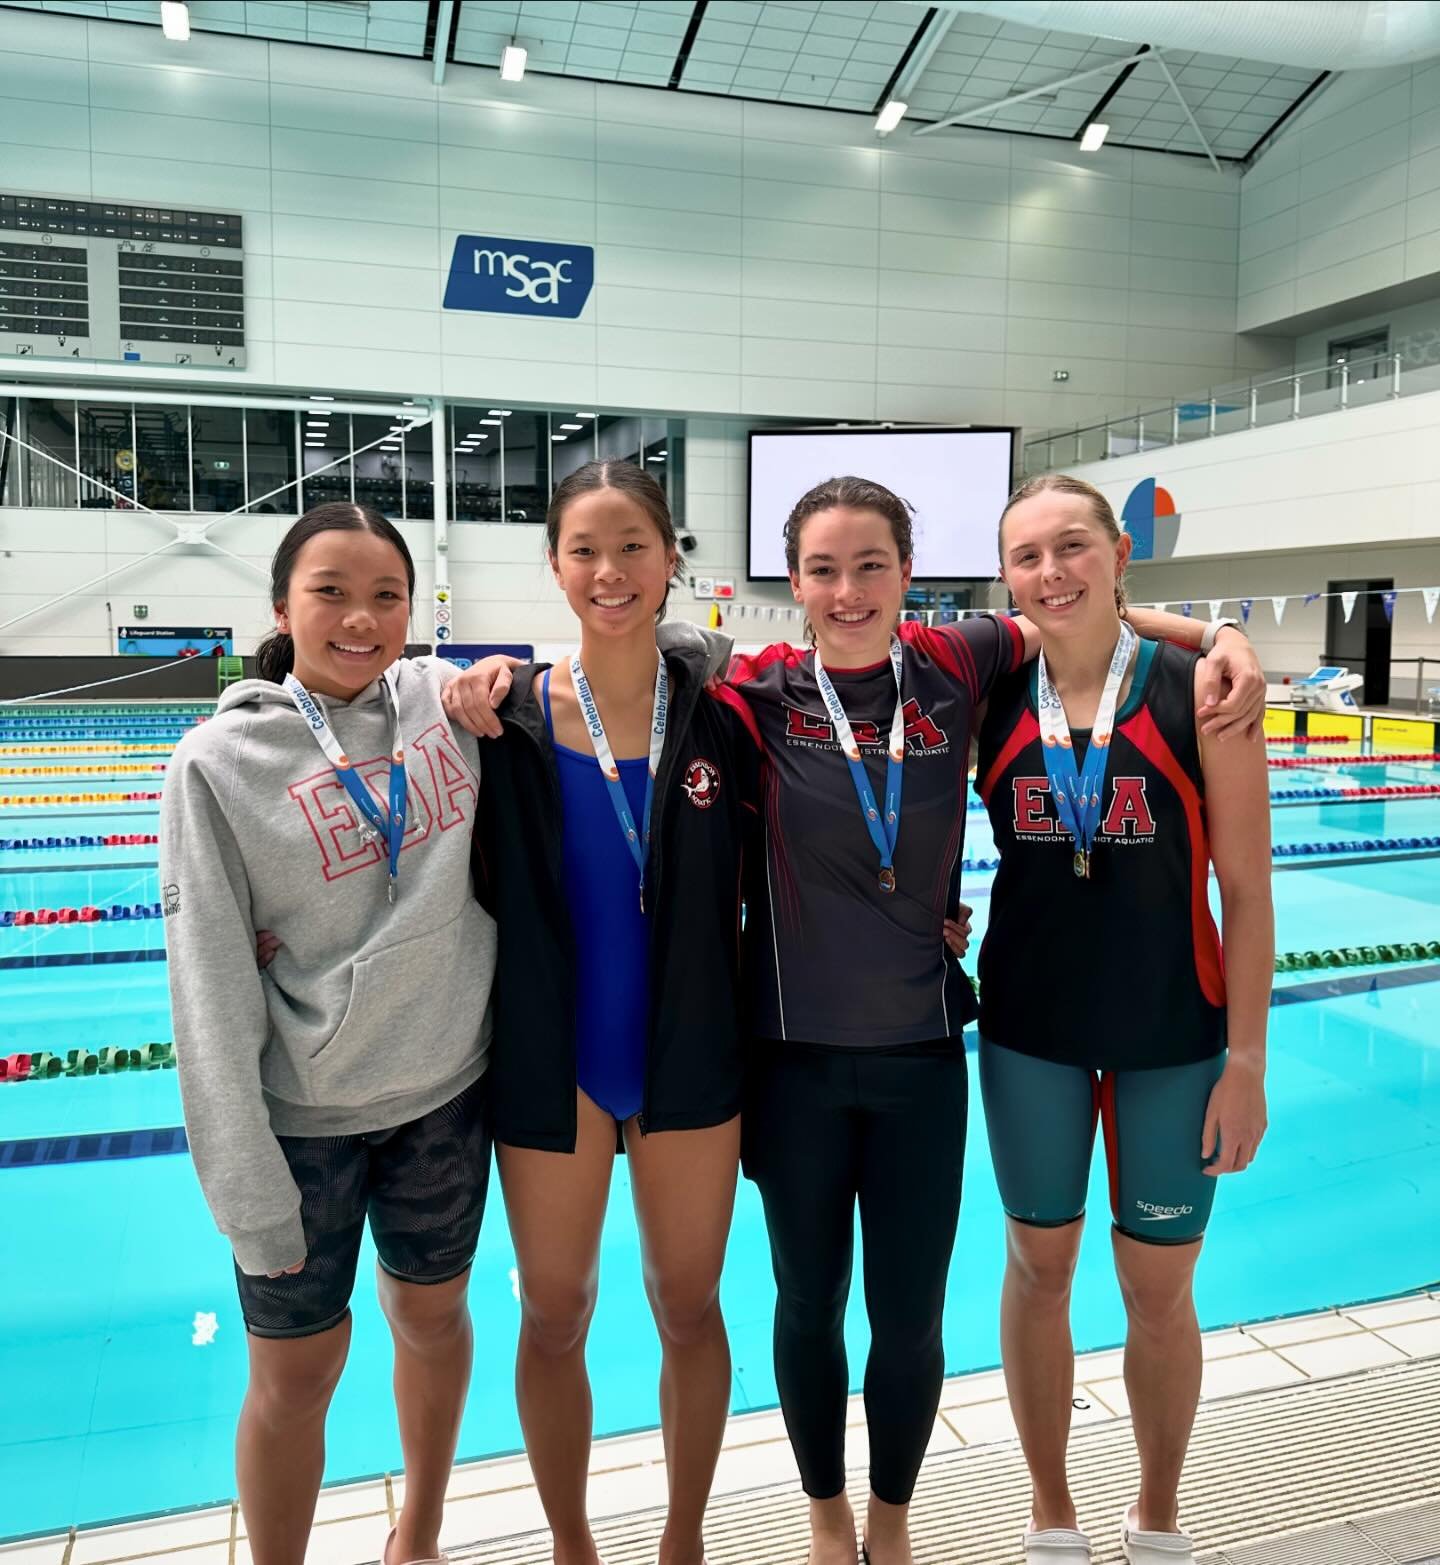 Vic Metro All Junior Champs!
&bull;
Well done to our medalists:
Indy - 🥇50m Backstroke, 🥉50m Butterfly
Angelina - 🥈50m Breaststroke
Ruby - 🥉50m Breaststroke
Megan - 🥉50m Freestyle 
Shout out to our other finalists on their great performances:
Li